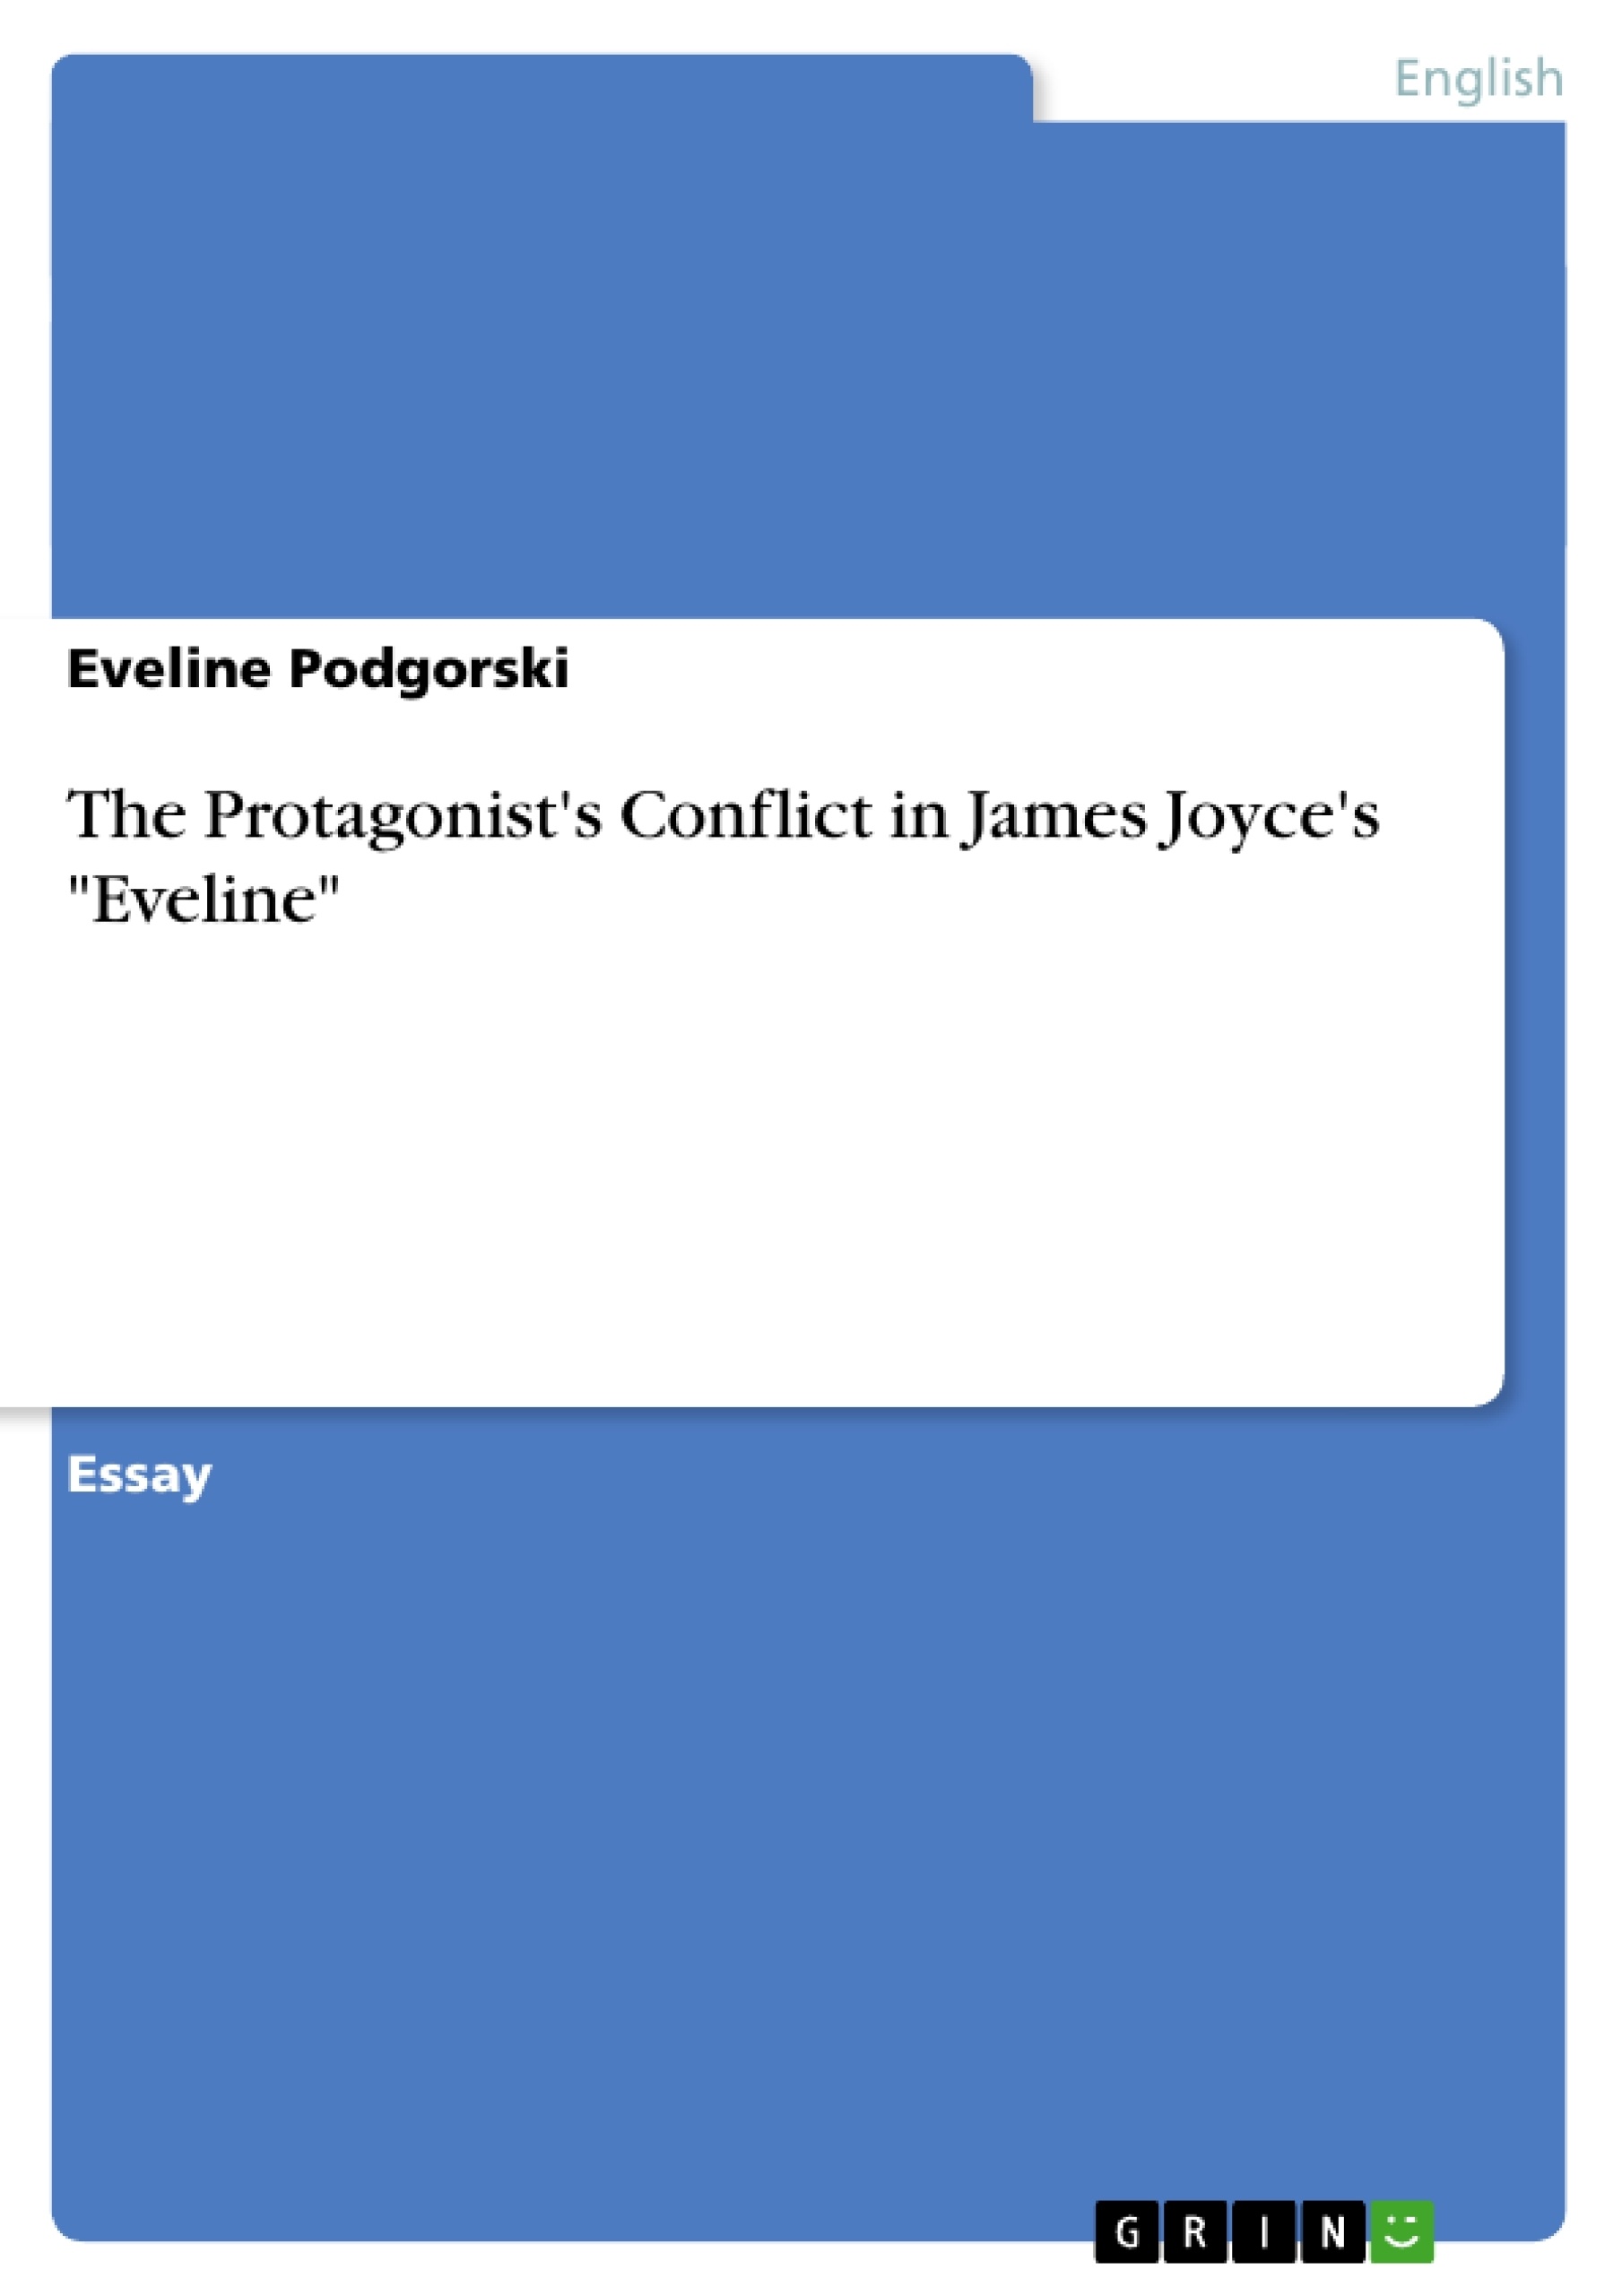 Title: The Protagonist's Conflict in James Joyce's "Eveline"